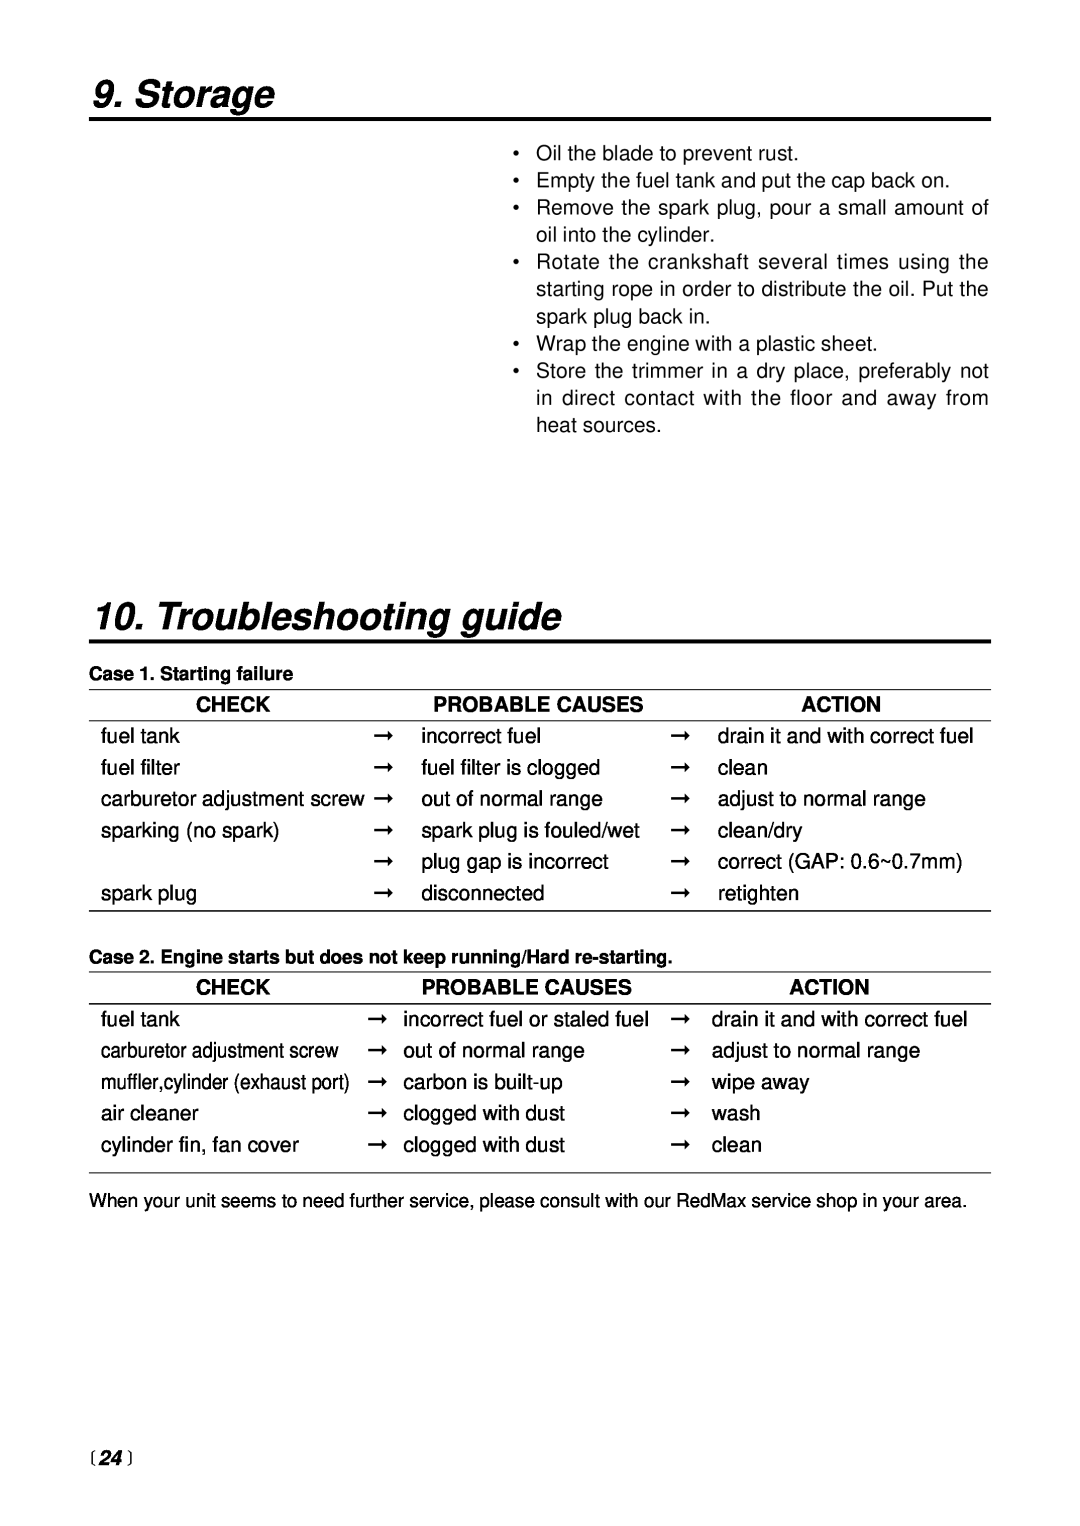 RedMax CHT2301 manual Storage, Troubleshooting guide,  24  